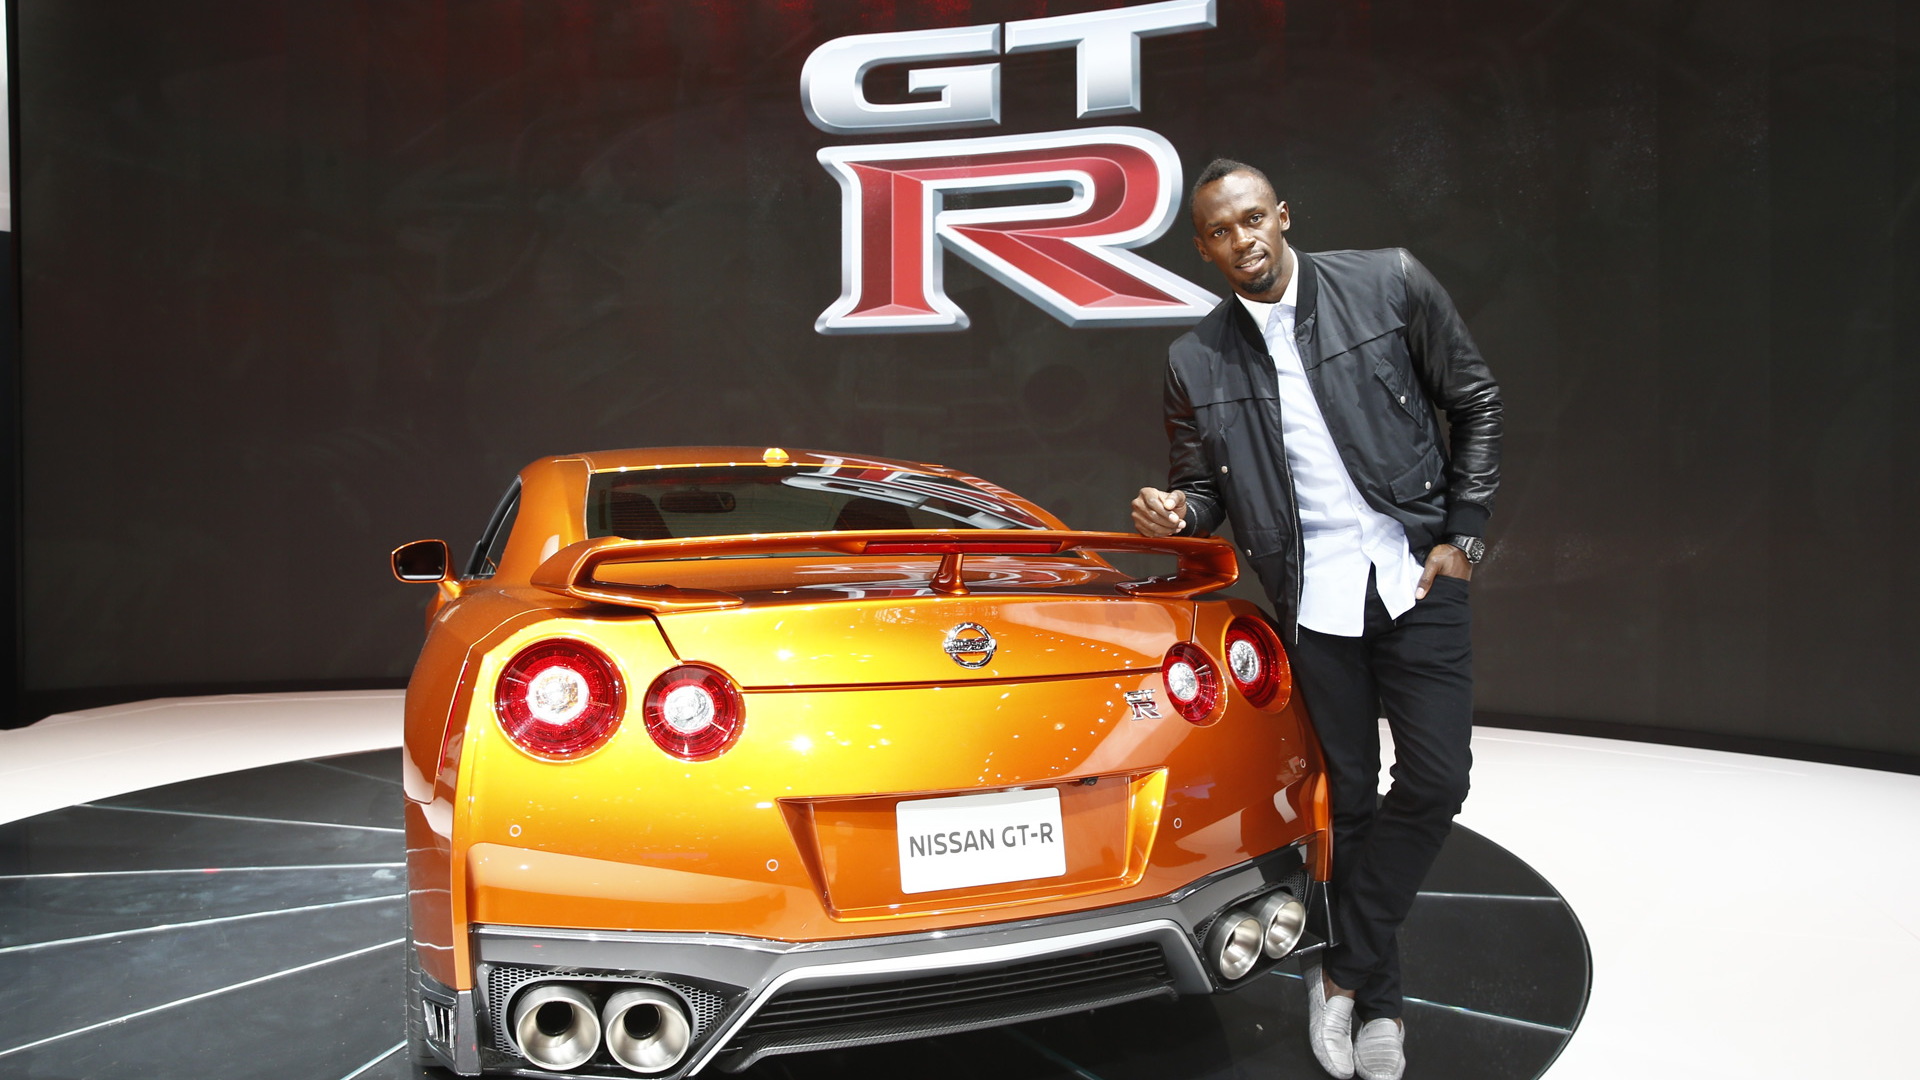 Usain Bolt and the 2017 Nissan GT-R